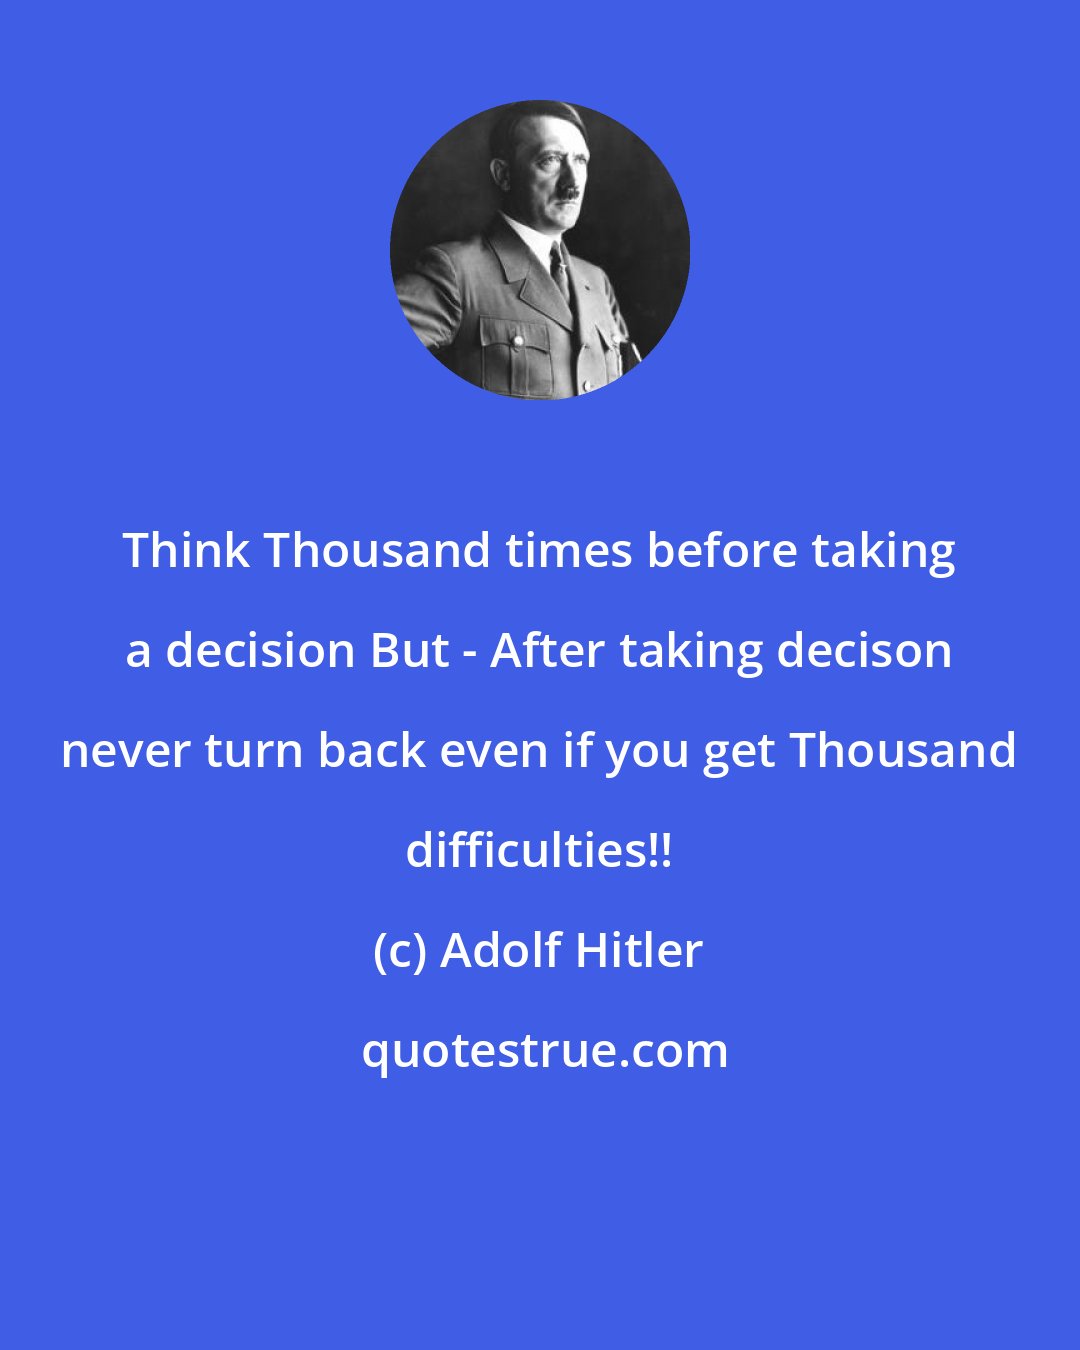 Adolf Hitler: Think Thousand times before taking a decision But - After taking decison never turn back even if you get Thousand difficulties!!